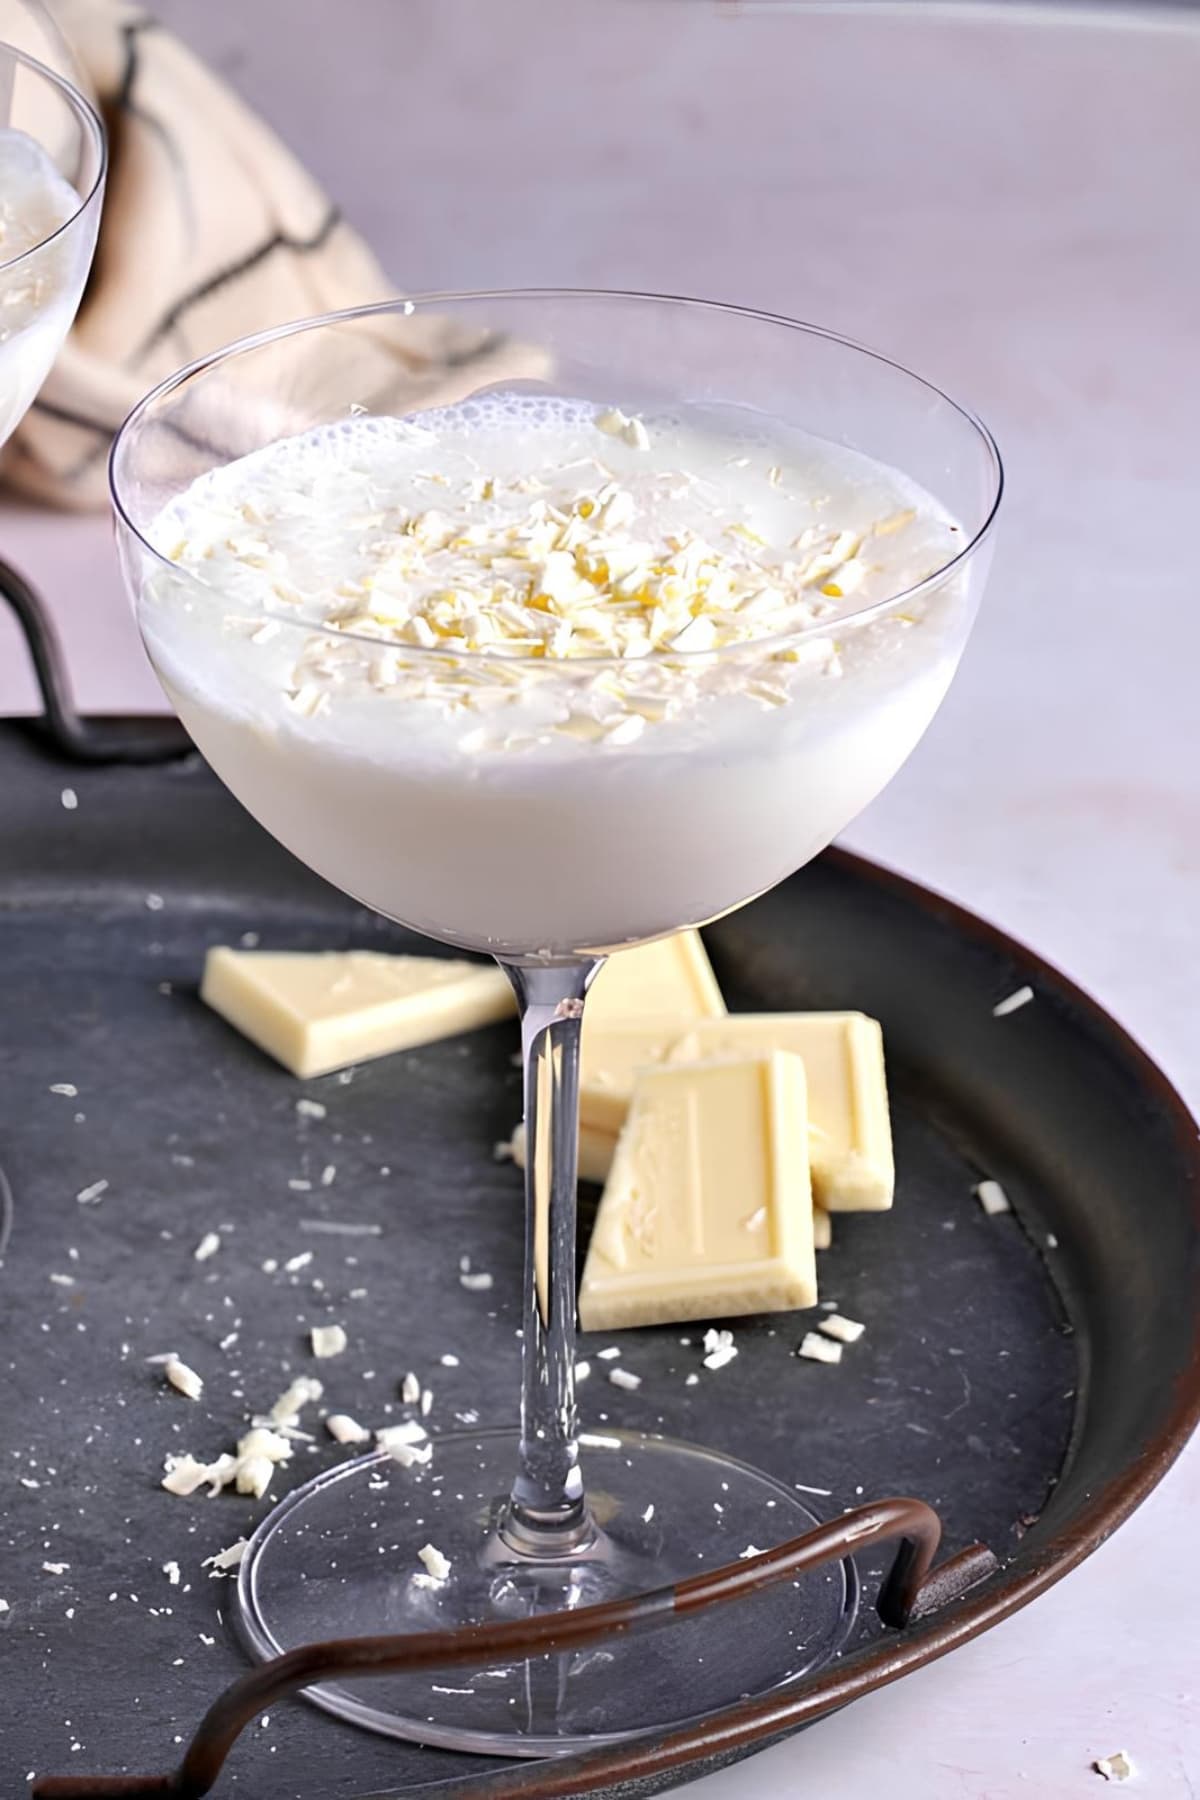 White chocolate martini served on cocktail glass with white chocolate shavings.